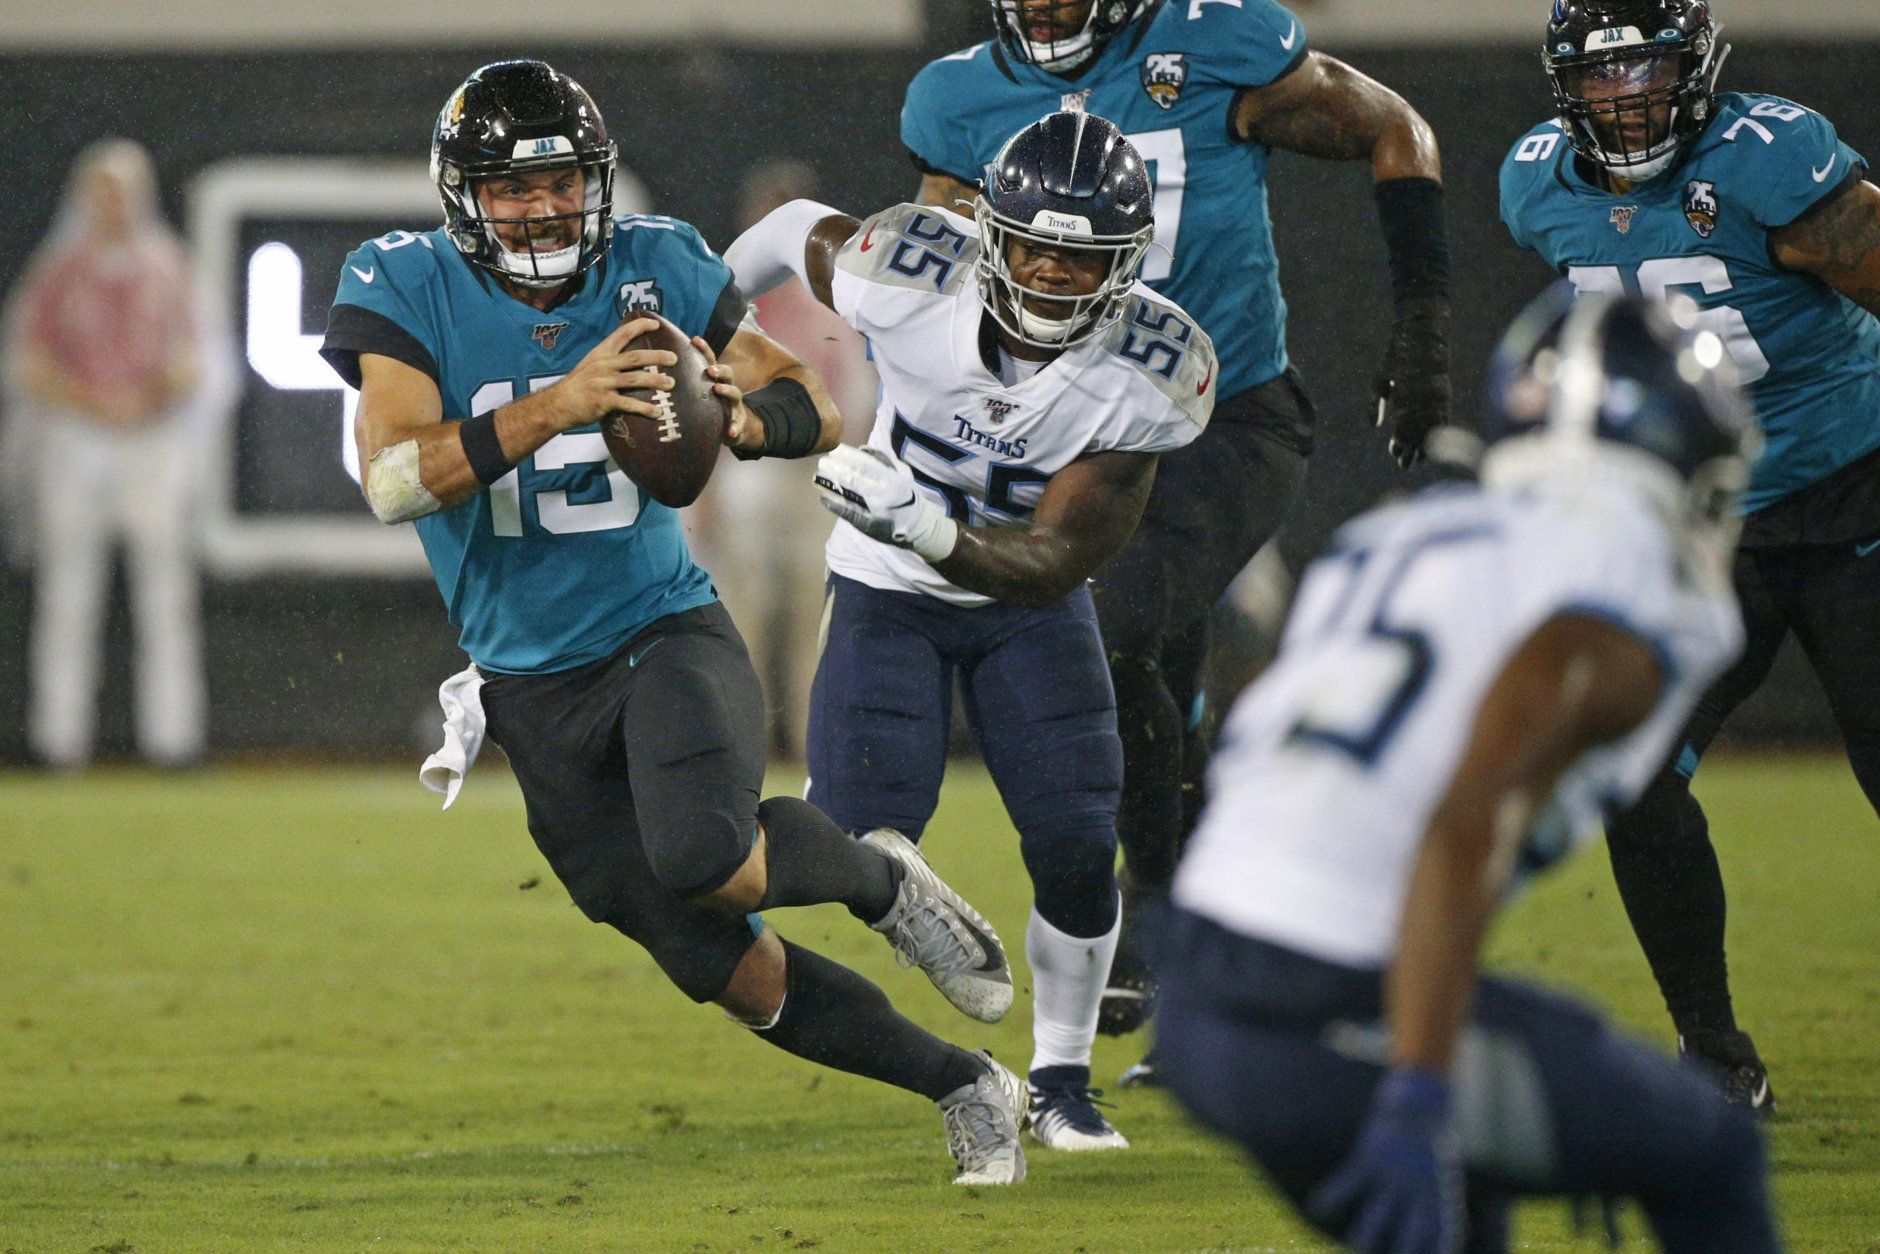 <p><b><i>Titans 7</i></b><br />
<b><i>Jaguars 20</i></b></p>
<p>Right at the point when Jacksonville was <a href="https://profootballtalk.nbcsports.com/2019/09/17/jaguars-have-fallen-apart-since-last-years-win-over-patriots/" target="_blank" rel="noopener" data-saferedirecturl="https://www.google.com/url?q=https://profootballtalk.nbcsports.com/2019/09/17/jaguars-have-fallen-apart-since-last-years-win-over-patriots/&amp;source=gmail&amp;ust=1569267828649000&amp;usg=AFQjCNGnReY7tlDUUHGAkIsn3qWvRQZFbg">trending in the wrong direction</a>, Gardner Minshew showed up out of nowhere to join D.C.-native Byron Leftwich as the only Jaguars QBs to throw for a touchdown in each of his first three games. If the Jags win the AFC South with the mustached (and <a href="https://twitter.com/BleacherReport/status/1175603494469824512?s=20" target="_blank" rel="noopener">leggy</a>) Minshew at QB, Nick Foles may have just been <a href="https://en.wikipedia.org/wiki/Wally_Pipp" target="_blank" rel="noopener" data-saferedirecturl="https://www.google.com/url?q=https://en.wikipedia.org/wiki/Wally_Pipp&amp;source=gmail&amp;ust=1569267828649000&amp;usg=AFQjCNG1IIn1fc4DkteoLMJ8BItYuajBQw">Wally Pipp</a>&#8216;d two years after nearly doing the same to Carson Wentz.</p>
